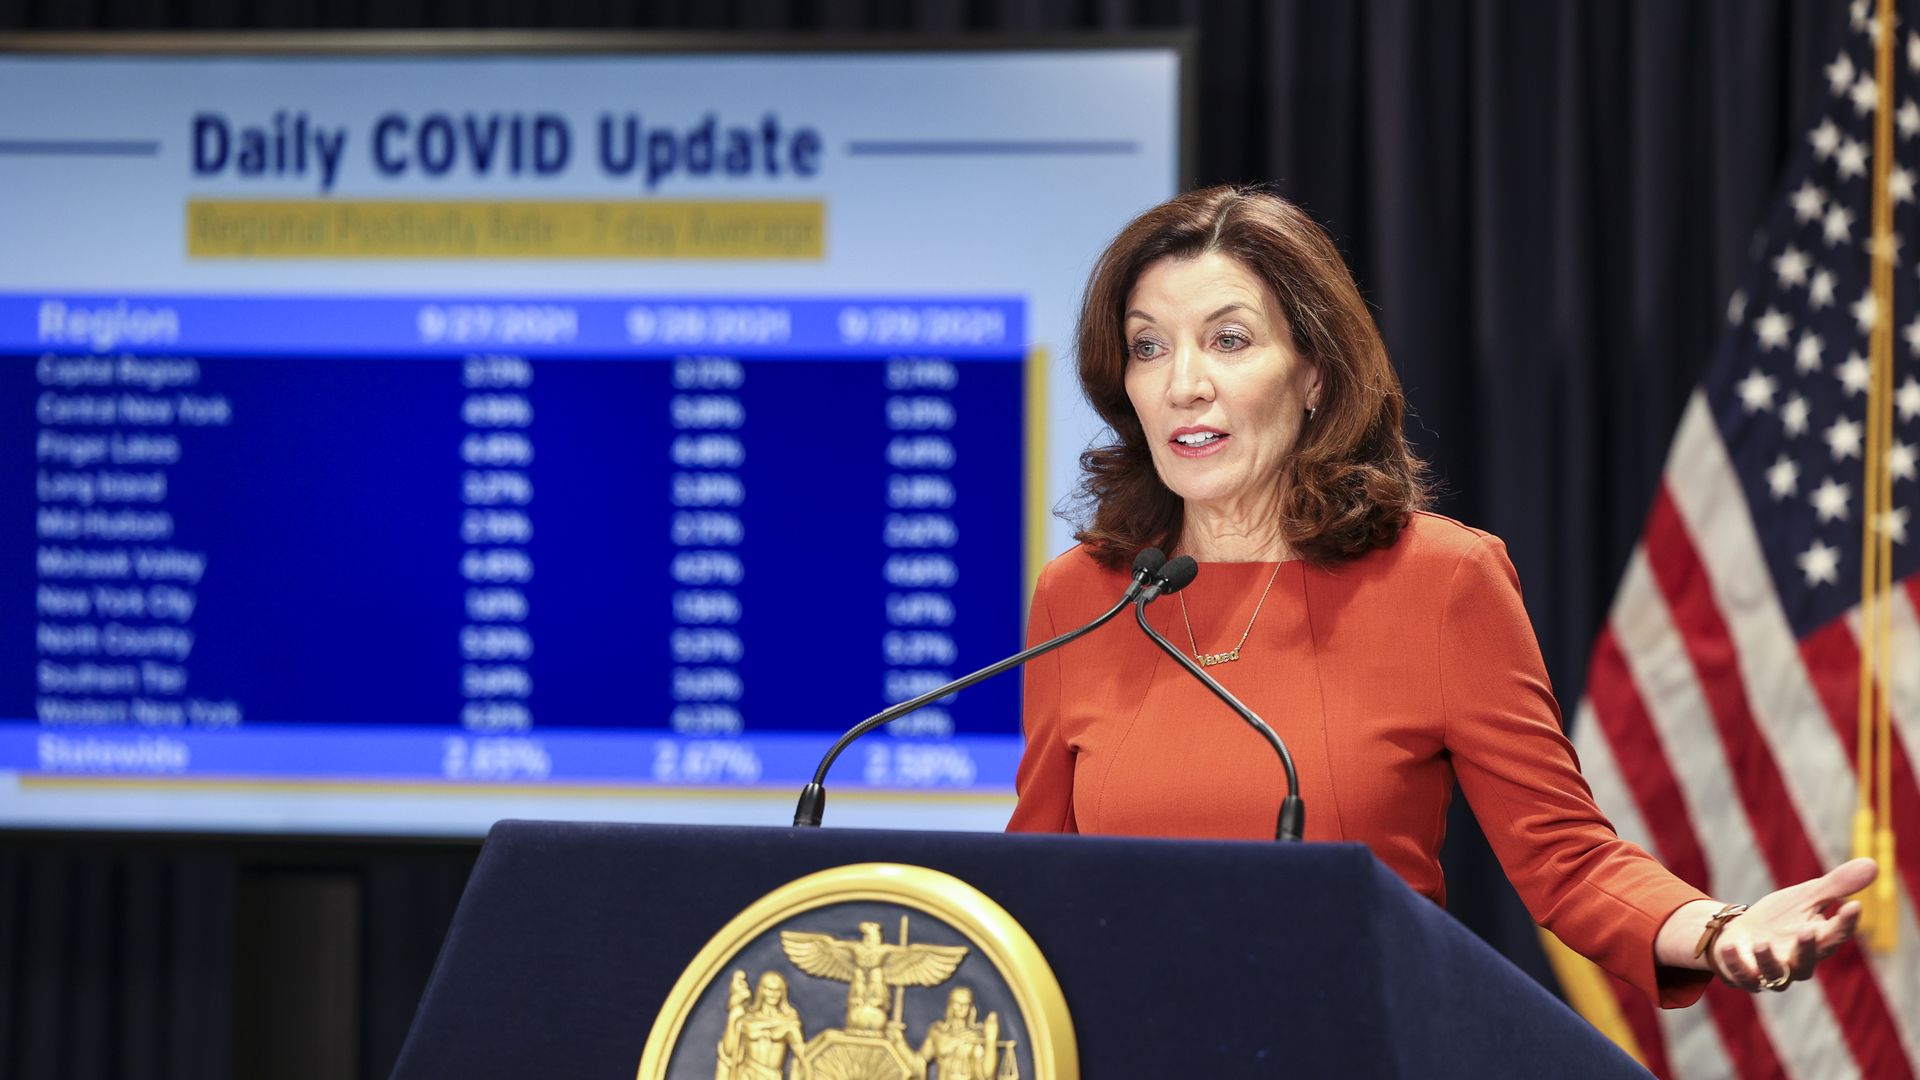 Photo of Kathy Hochul speaking from a podium giving a COVID update